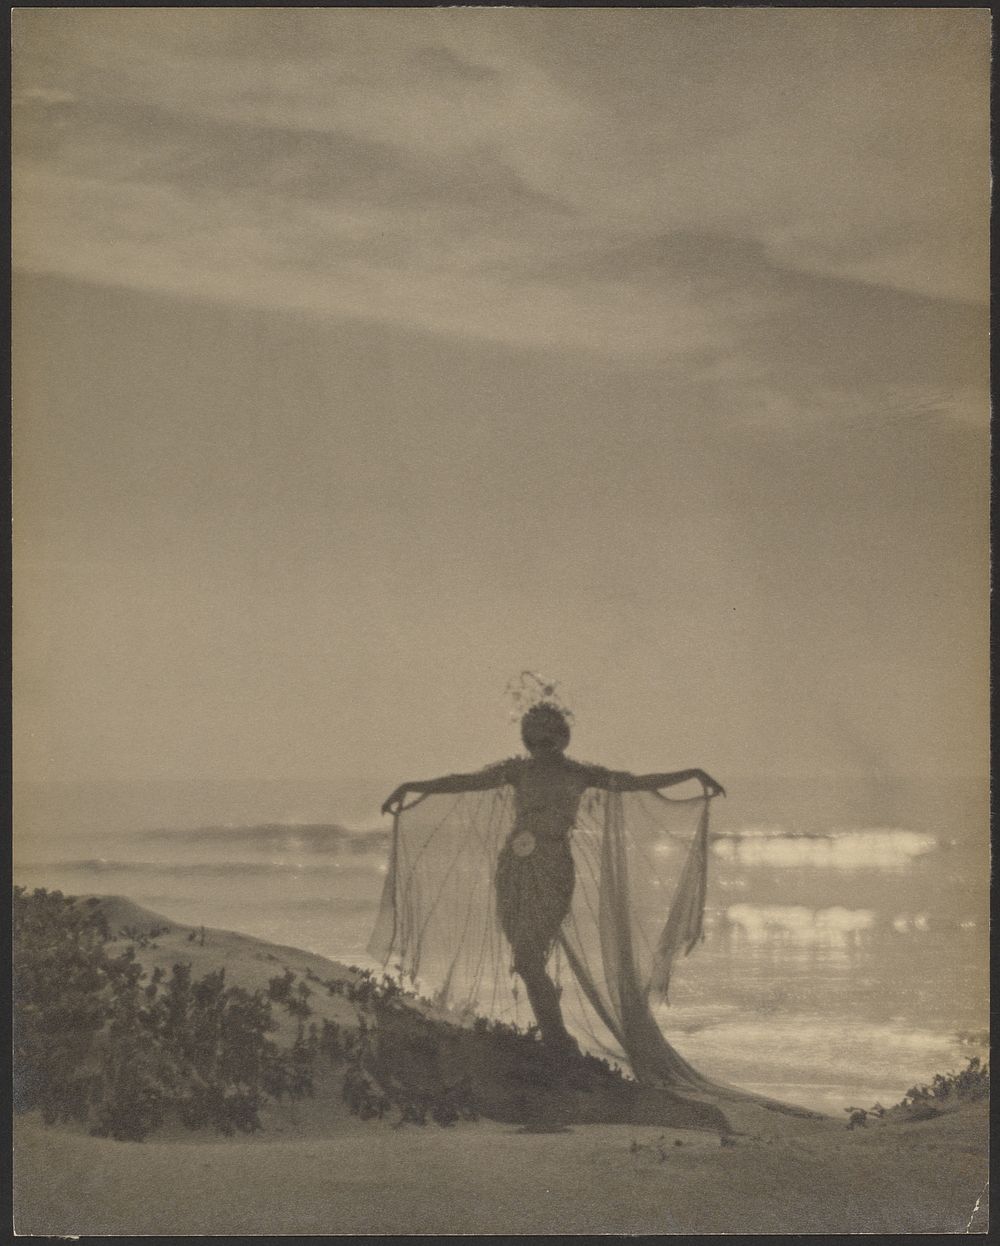 Back View of a Dancer Wearing a Sheer Costume at the Beach by Arthur F Kales